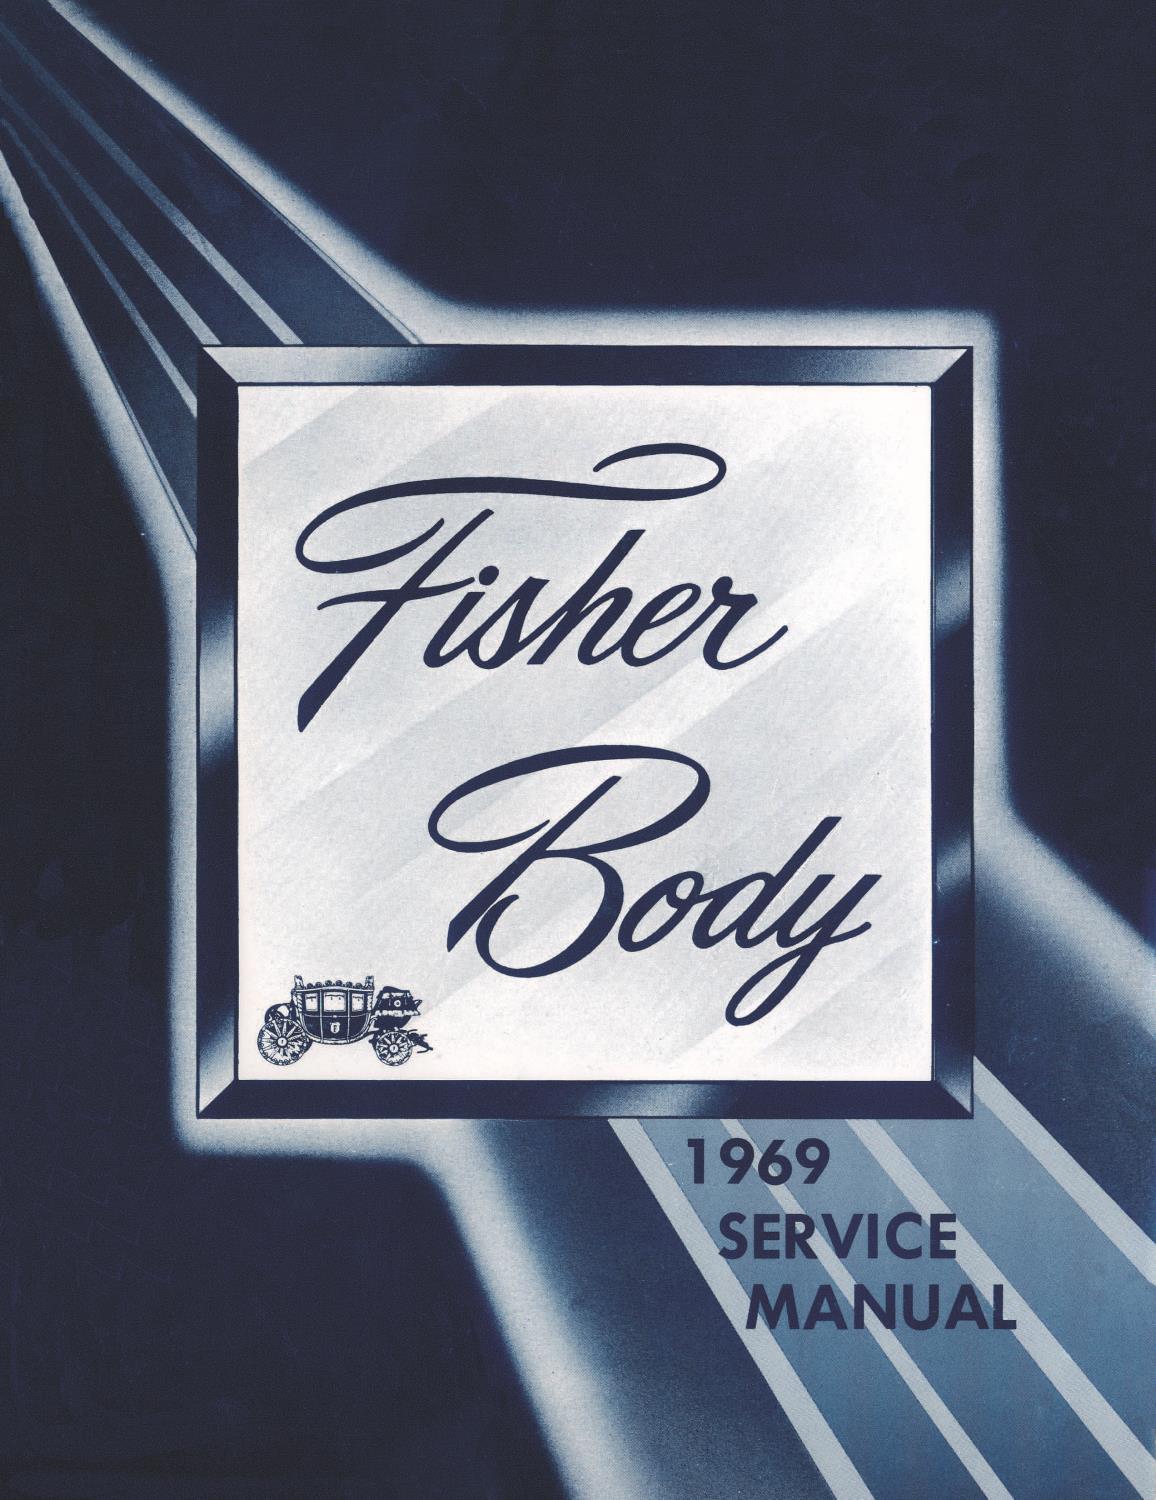 Fisher Body Service Manual for 1969 Buick, Cadillac, Chevrolet, Oldsmobile and Pontiac Models, A-B-C-D-E-F-G-X Body Styles